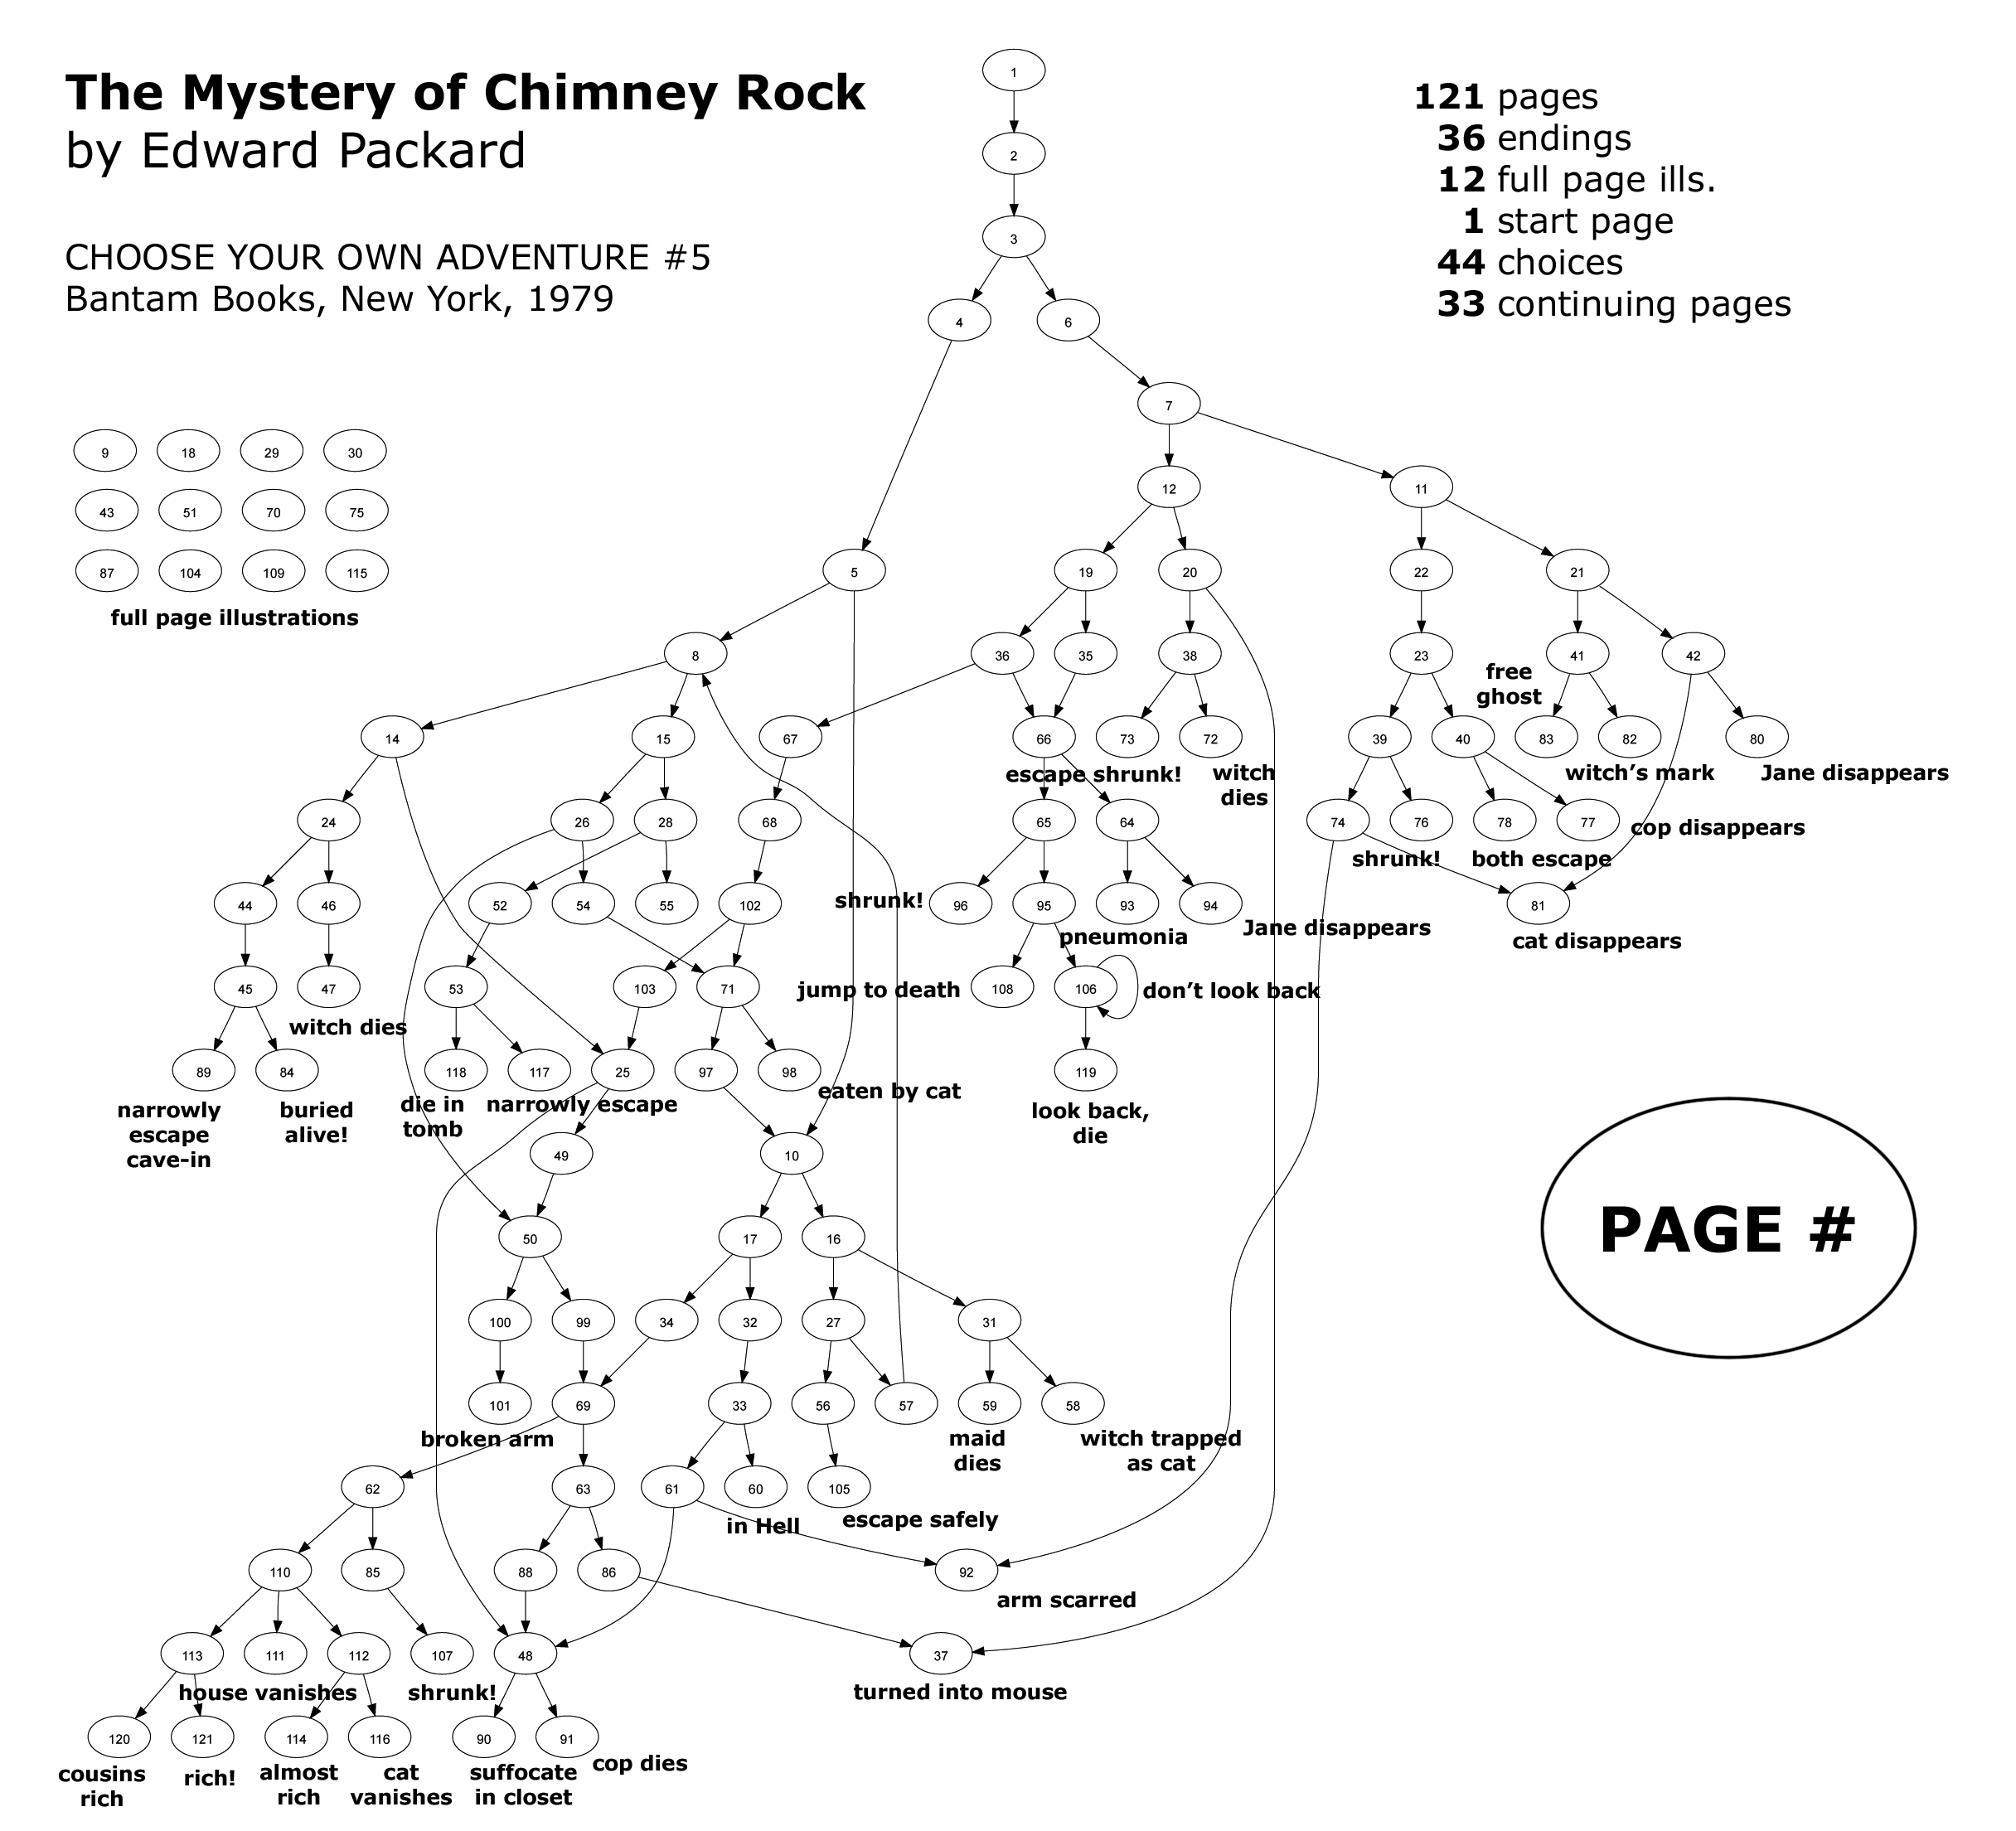 Directed graph of Edward Packard's 'The Mystery of Chimney Rock' with each page as a node.